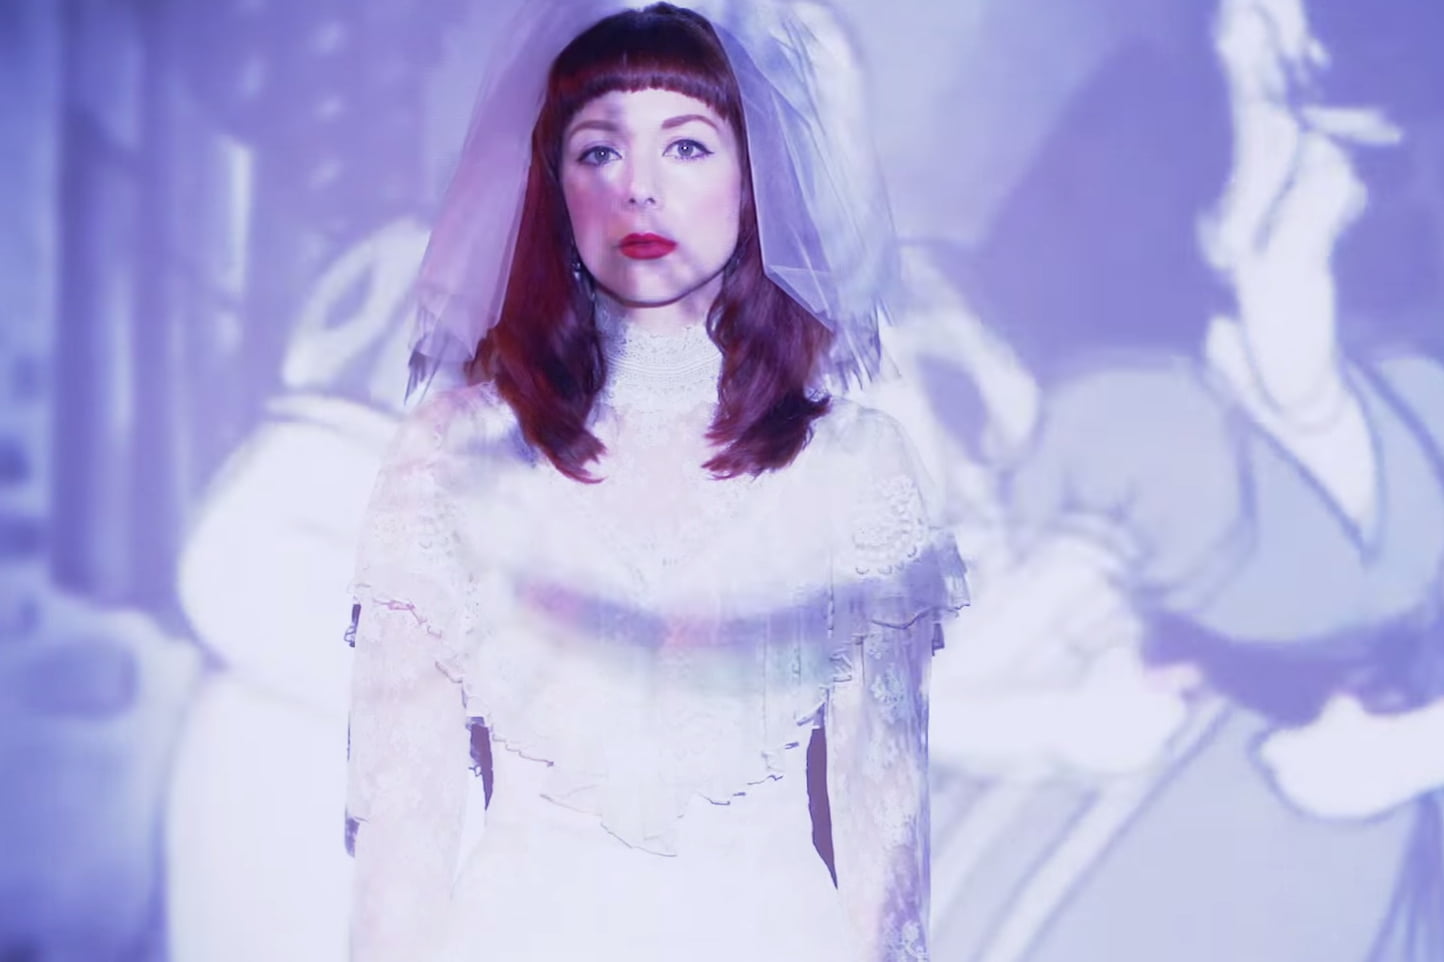 The VPME | Video Of The Week - The Anchoress - 'One For Sorrow' 1